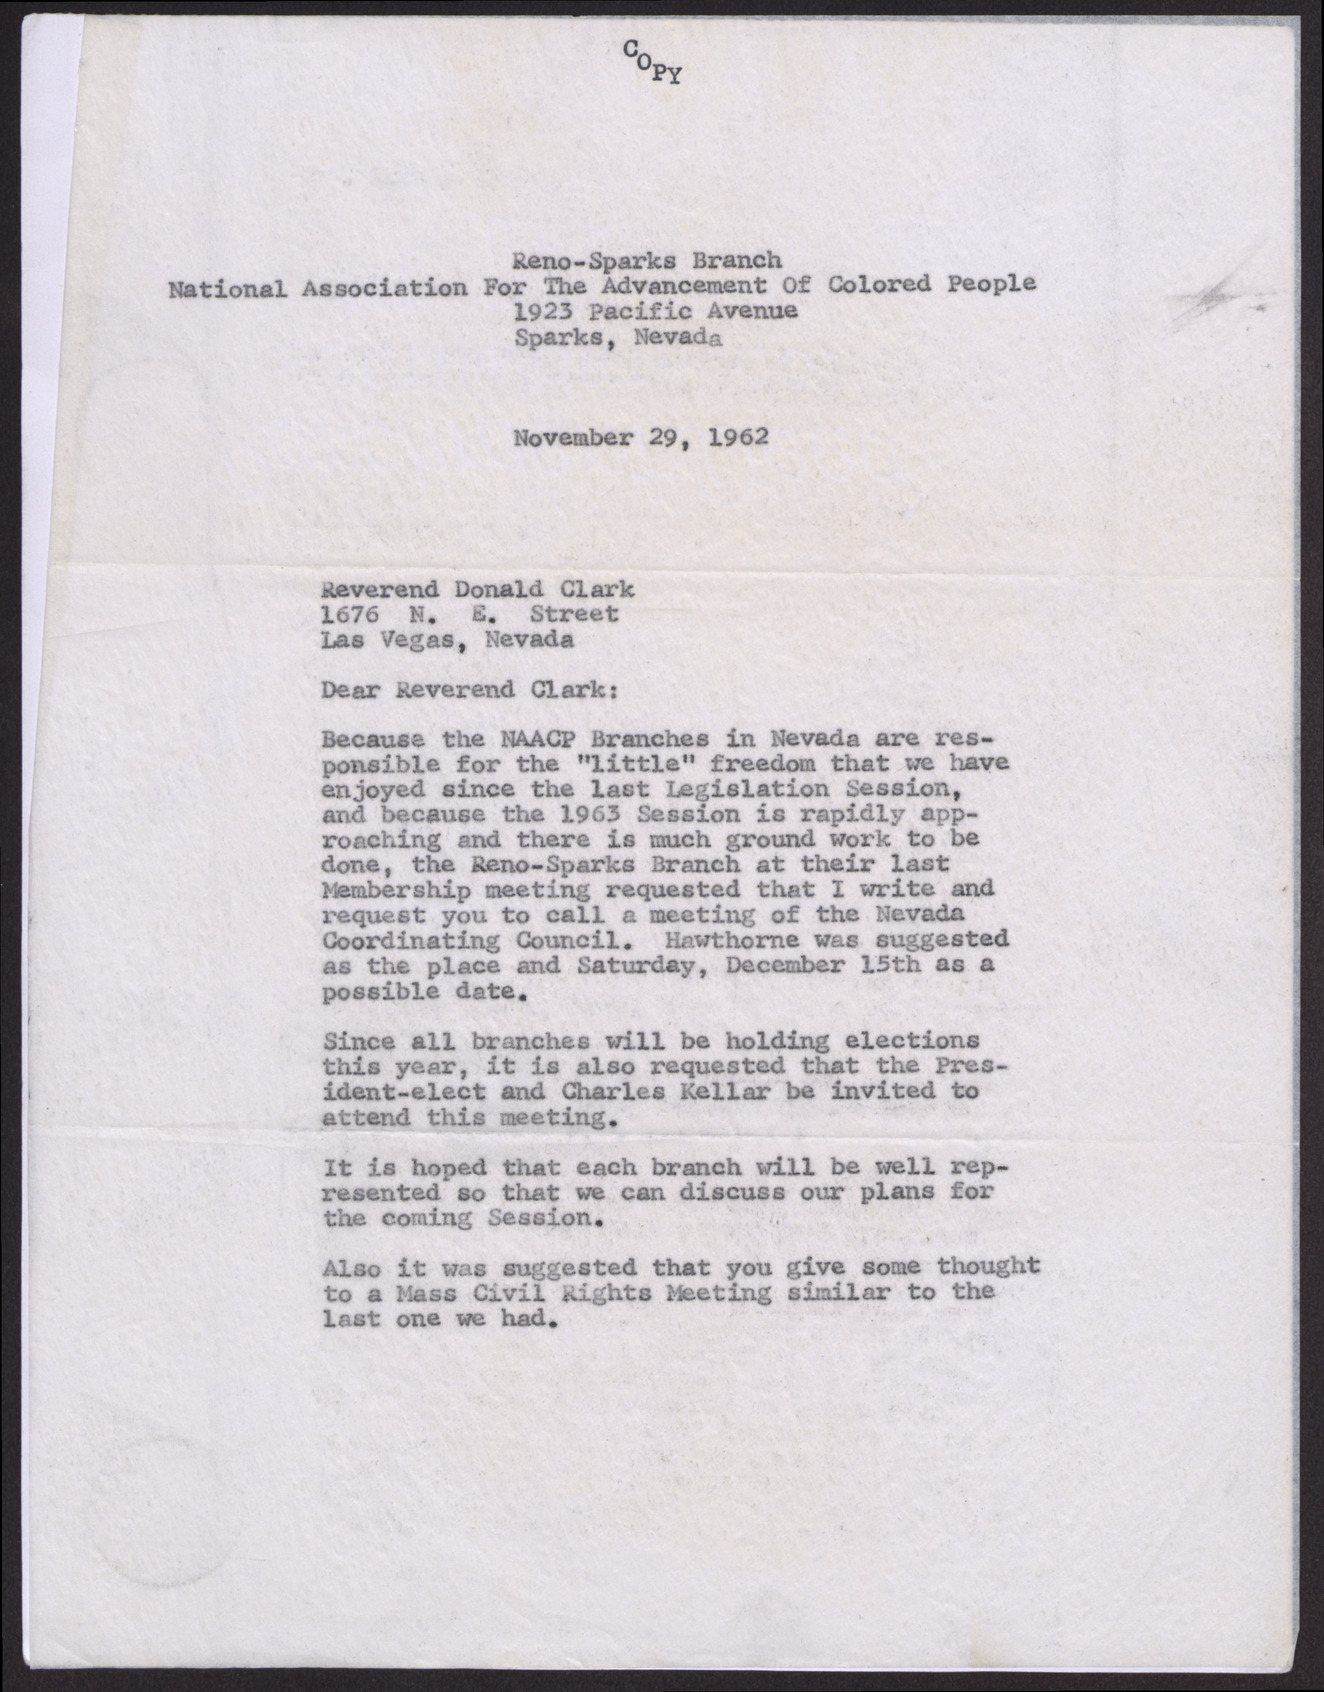 Letter to Reverend Donald Clark from Bertha S. Woodward (2 pages), November 29, 1962